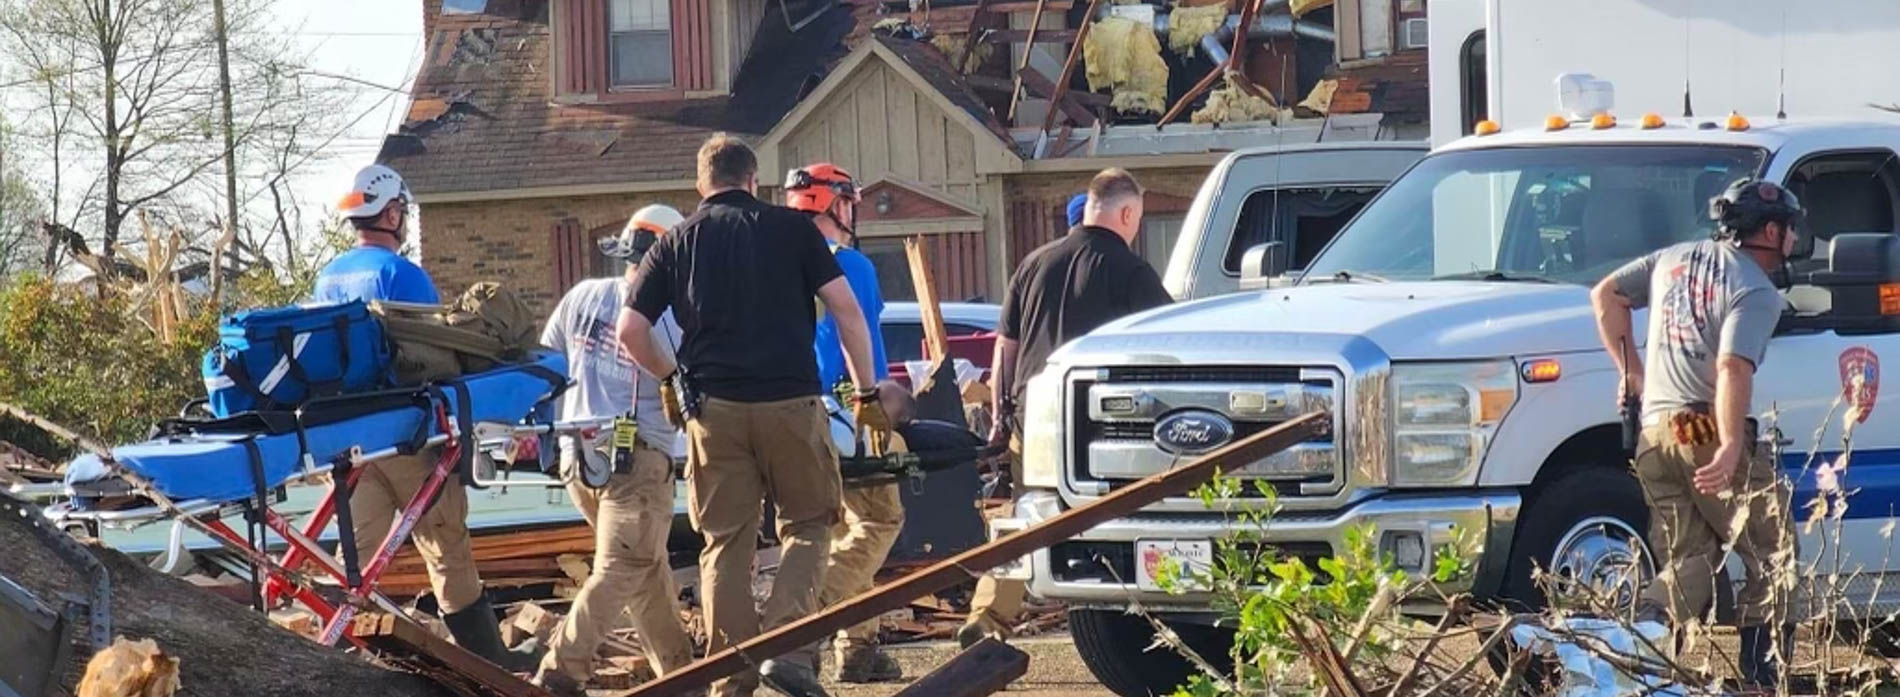 Mississippi Center for Emergency Services staff Will Appleby, center in black shirt, and Jeremy Benson, in black shirt to Appleby's right, help in search and rescue efforts at a Rolling Fork home.